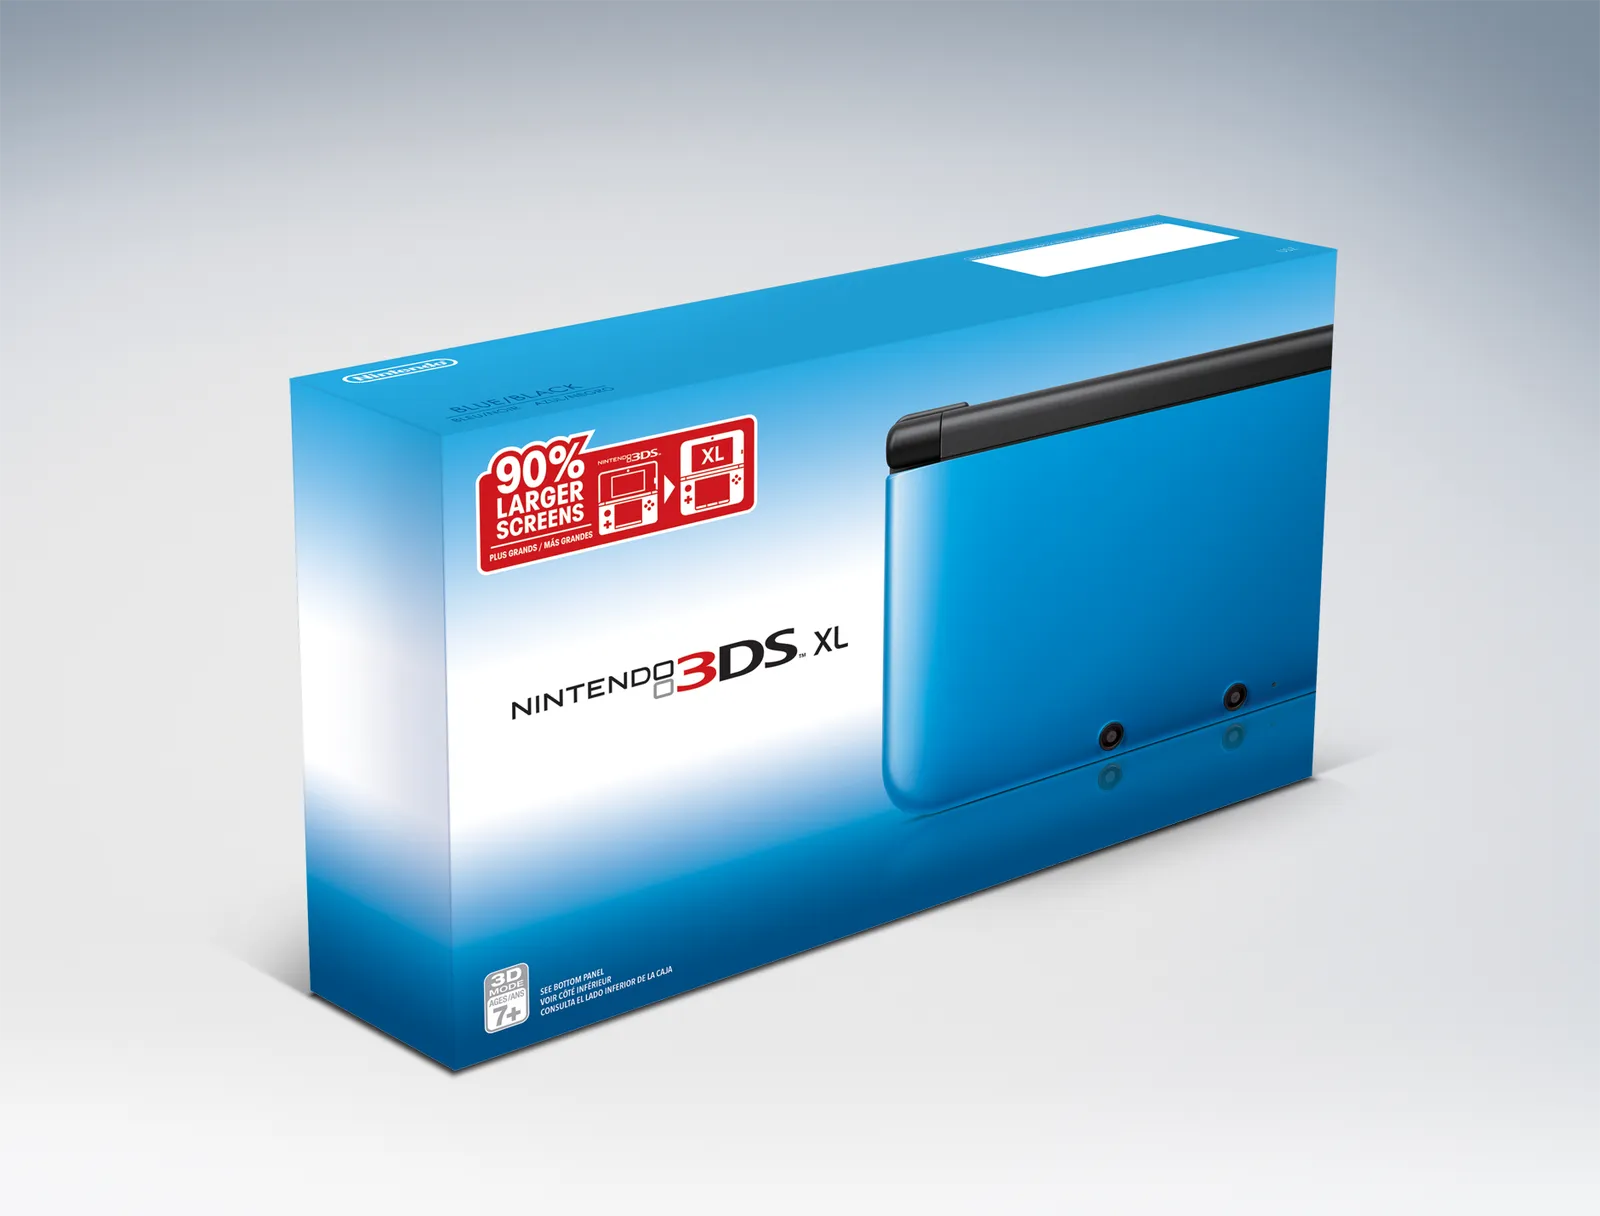 Nintendo 3DS XL Blue and Black Handheld Console